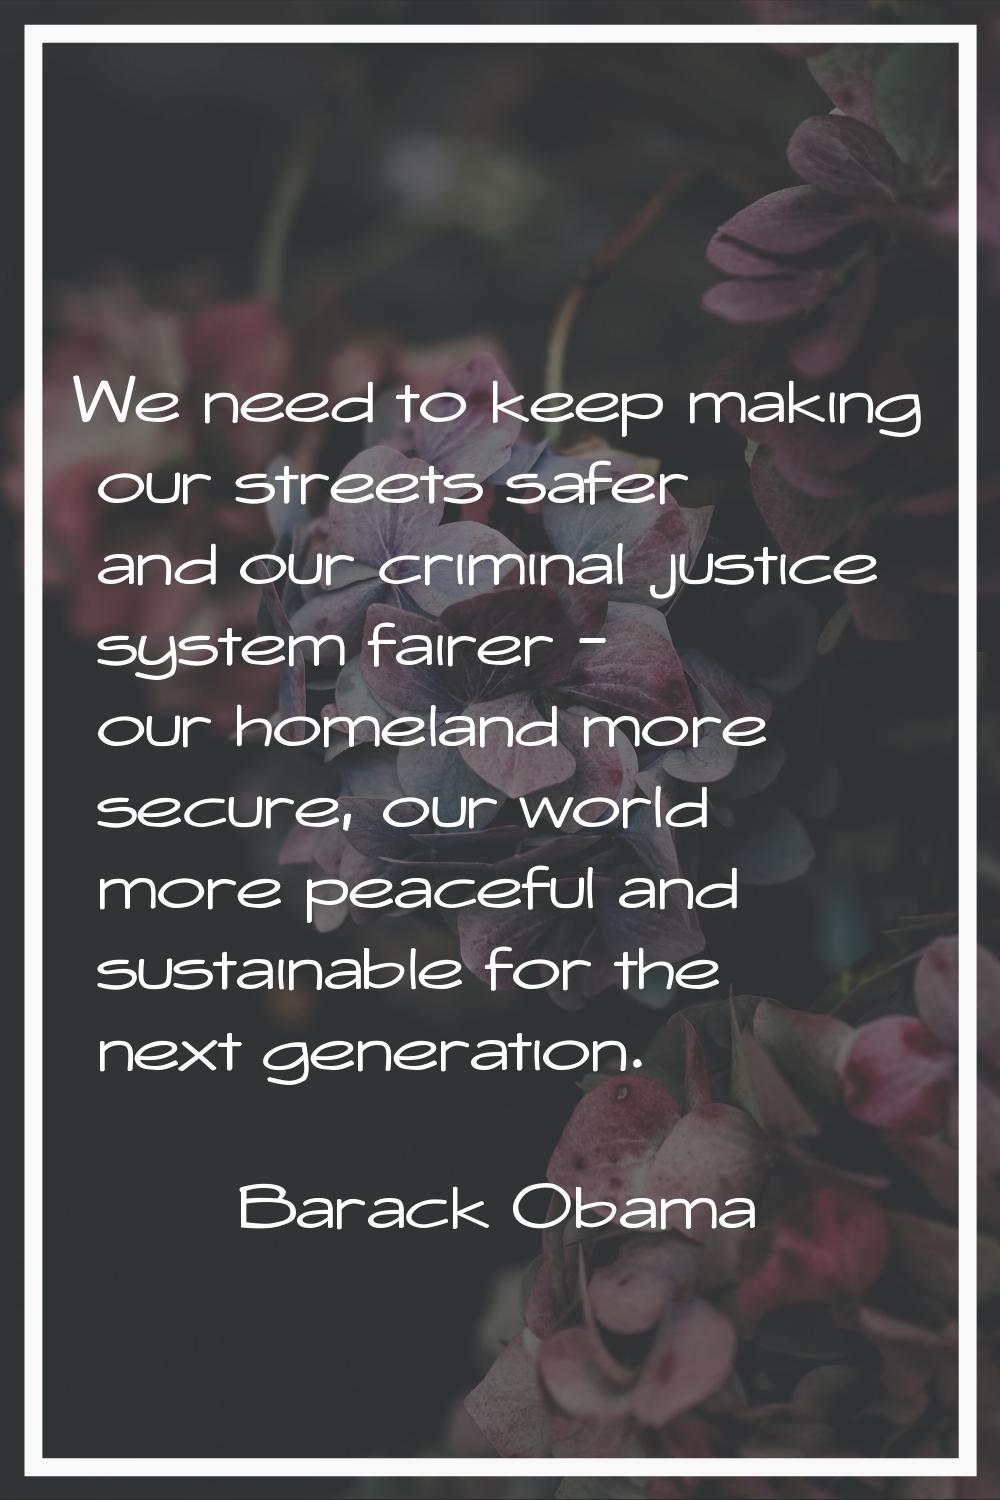 We need to keep making our streets safer and our criminal justice system fairer - our homeland more